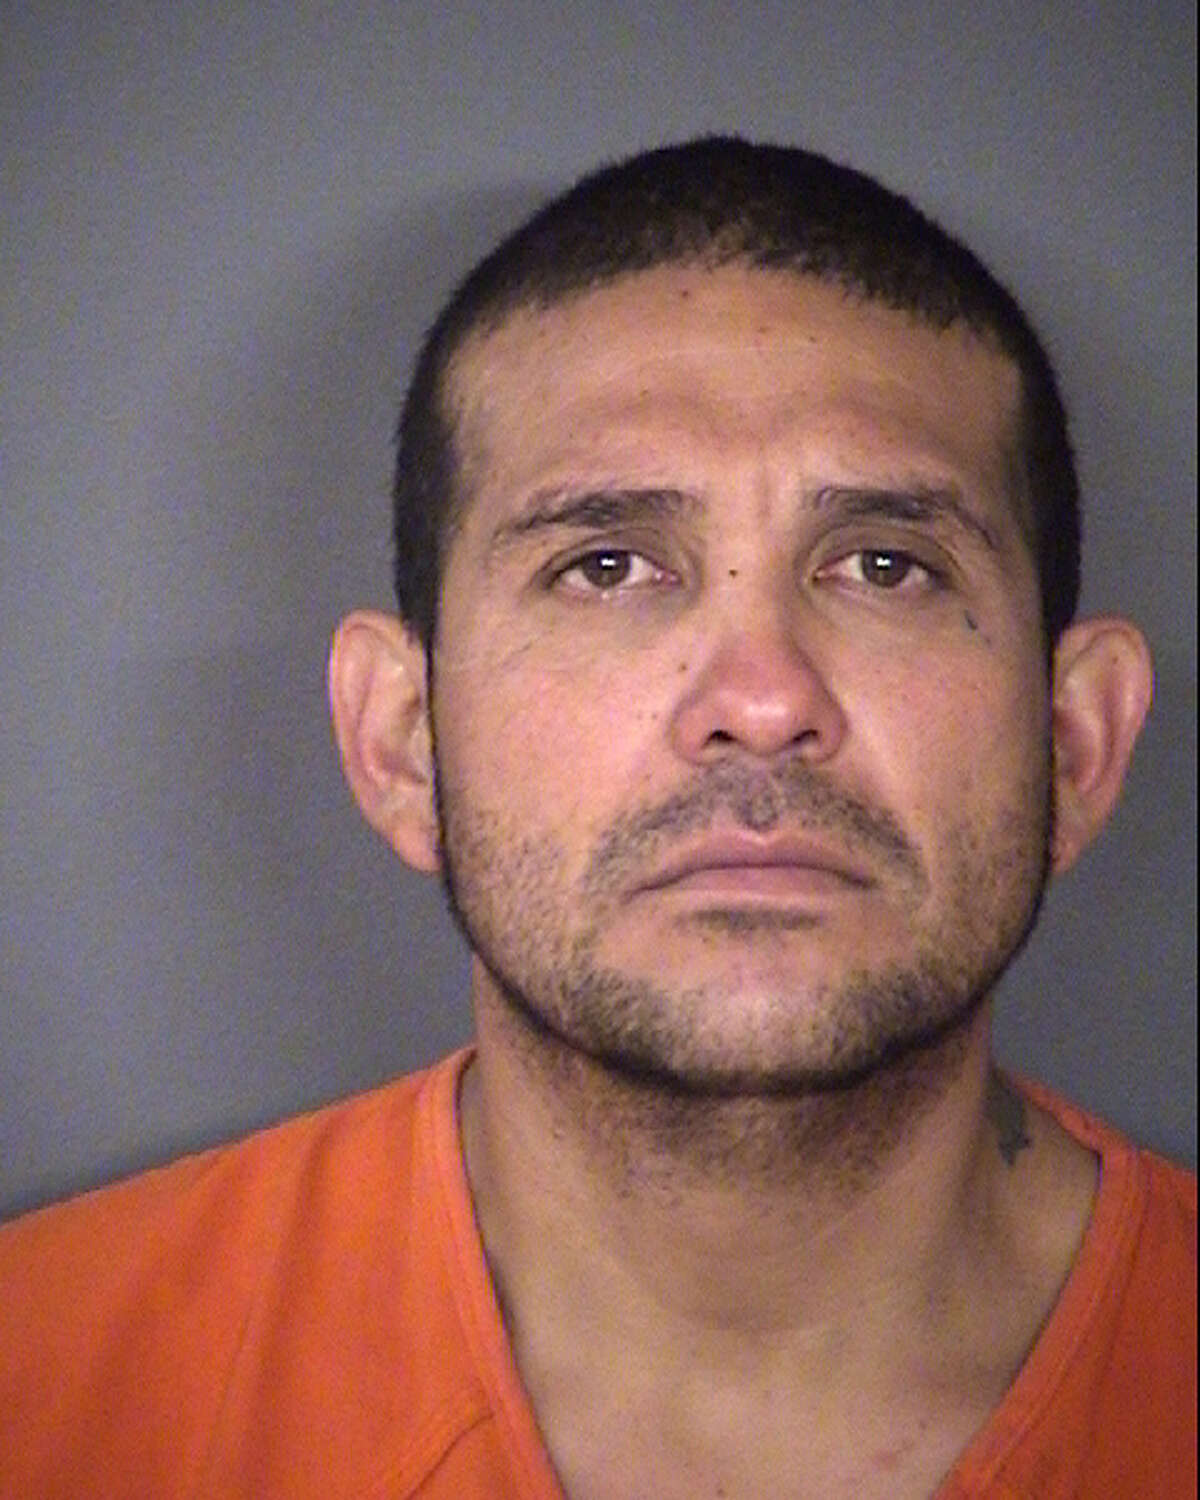 The suspect, Emmanuel Mendoza, now faces a charge of murder, a first-degree felony punishable by up to 99 years. He was booked into the Bexar County Jail on Wednesday on a $150,000 bond.